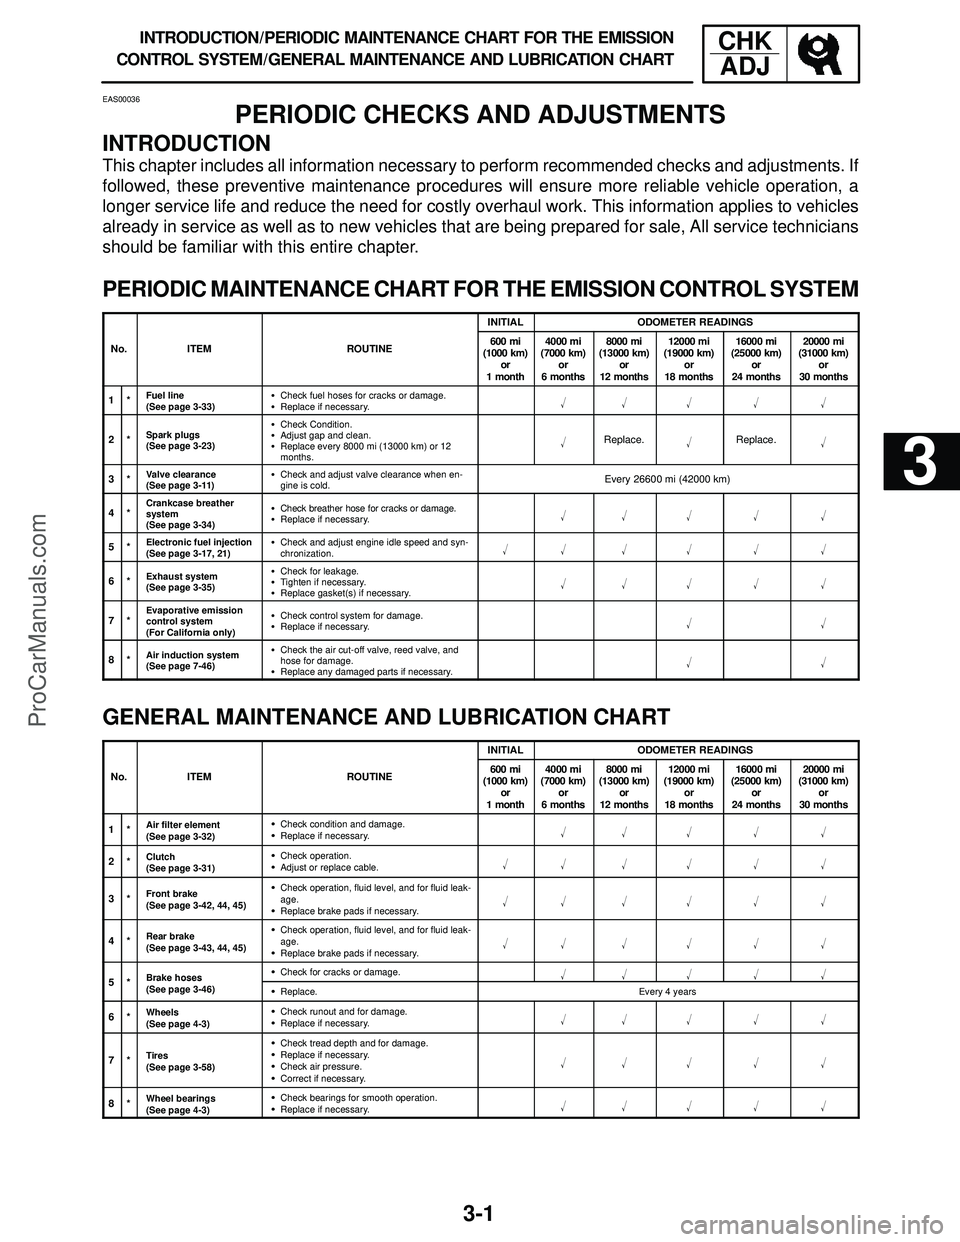 YAMAHA YZF-R1SC 2004  Service Manual 3-1
3
INTRODUCTION / PERIODIC MAINTENANCE CHART FOR THE EMISSION
CONTROL SYSTEM / GENERAL MAINTENANCE AND LUBRICATION CHARTCHK
ADJ
EAS00036
PERIODIC CHECKS AND ADJUSTMENTS
INTRODUCTION
This chapter in